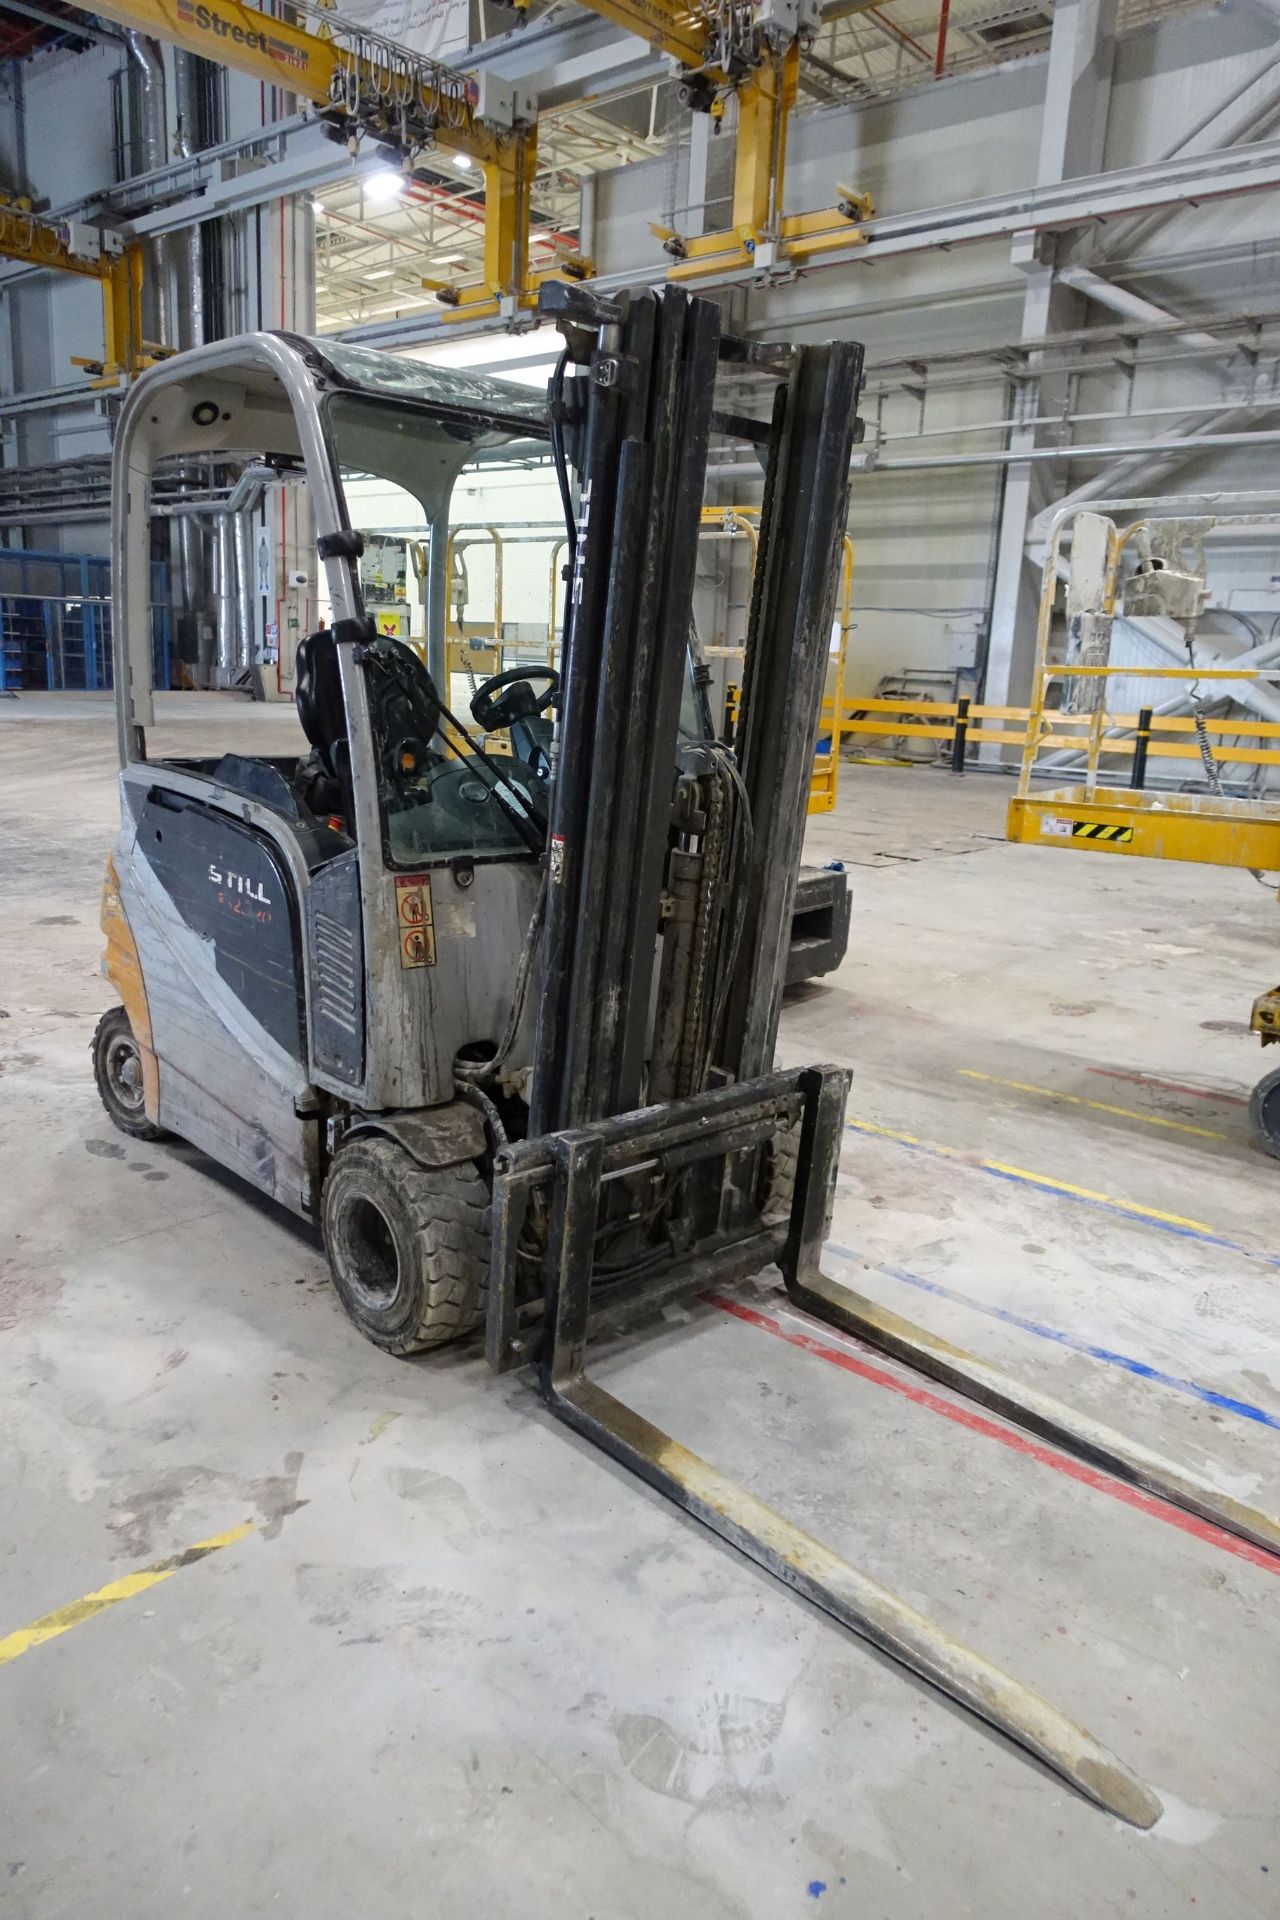 STILL RX20-20P Electric Forklift Truck, 2,000kg Capacity with Sideshift, Ser # 516216H00371 (2017) - Image 8 of 42